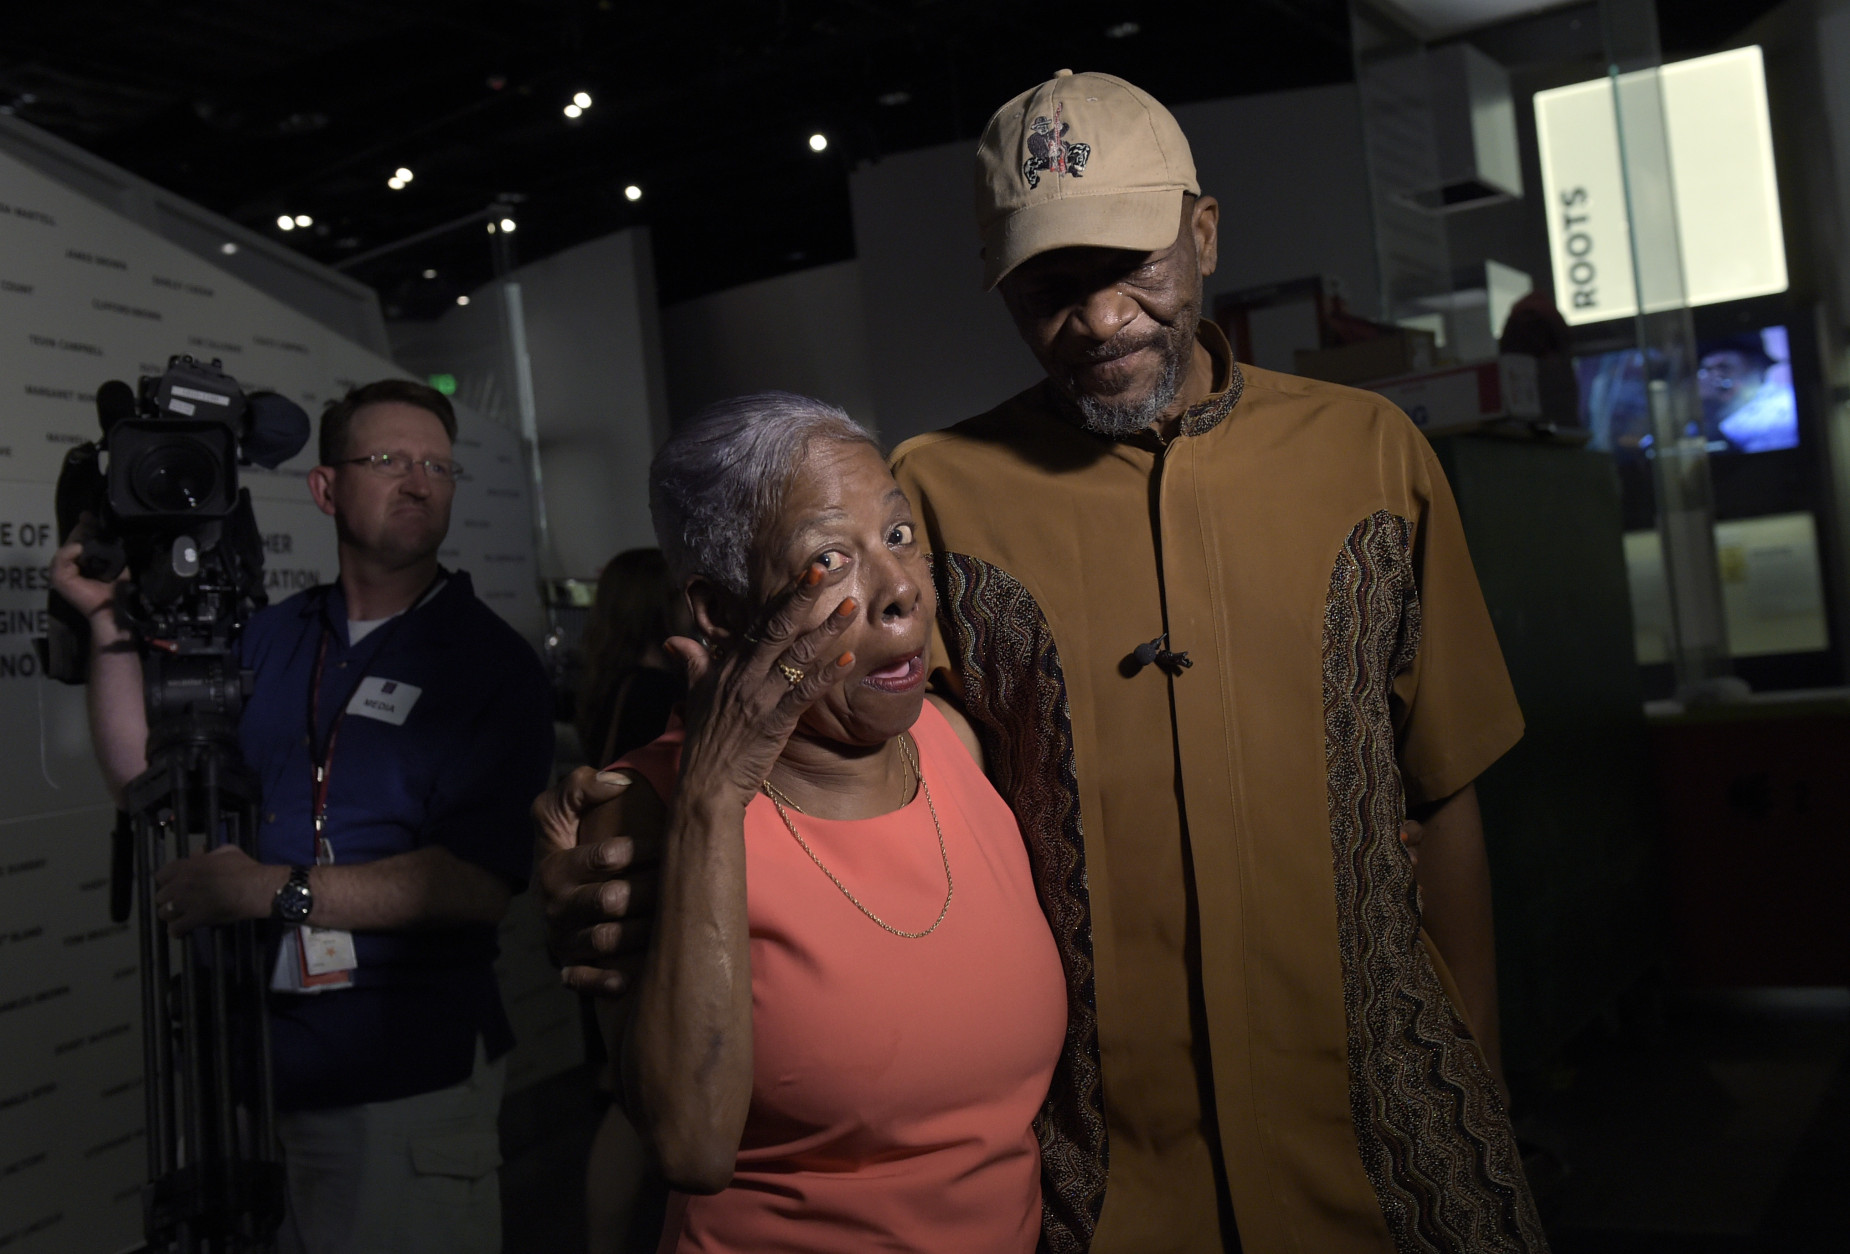 Gloria Jolivet, a niece-in-law to Bo Diddley, left, and Ellis McDaniel, Jr., right, son of Bo Diddley, stop to look at the exhibited space dedicated to Bo Diddley at the National Museum of African American History and Culture in Washington, Wednesday, Sept. 14, 2016, during a press preview. (AP Photo/Susan Walsh)